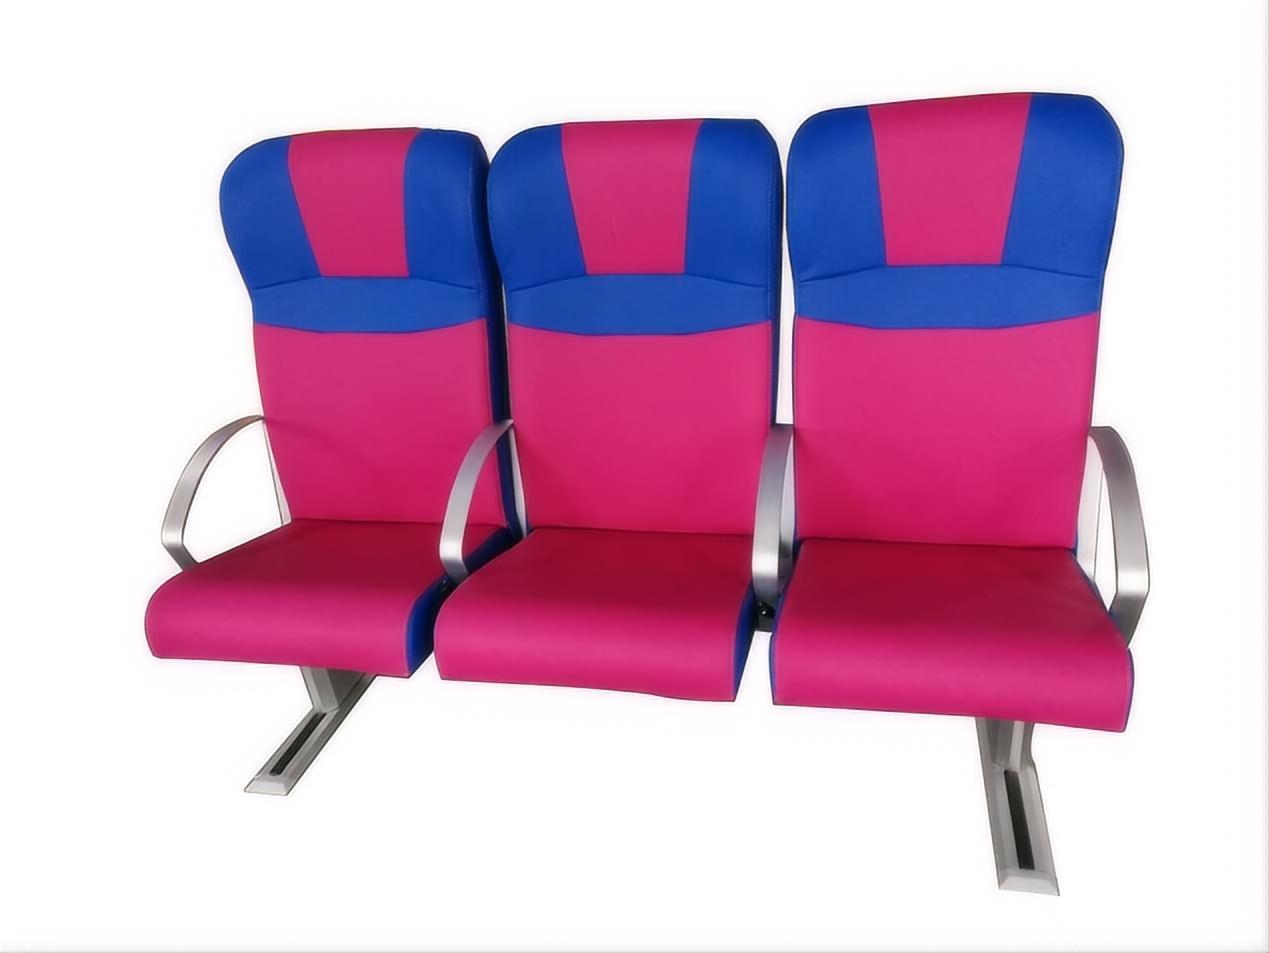 PS-006 marine ferry chair